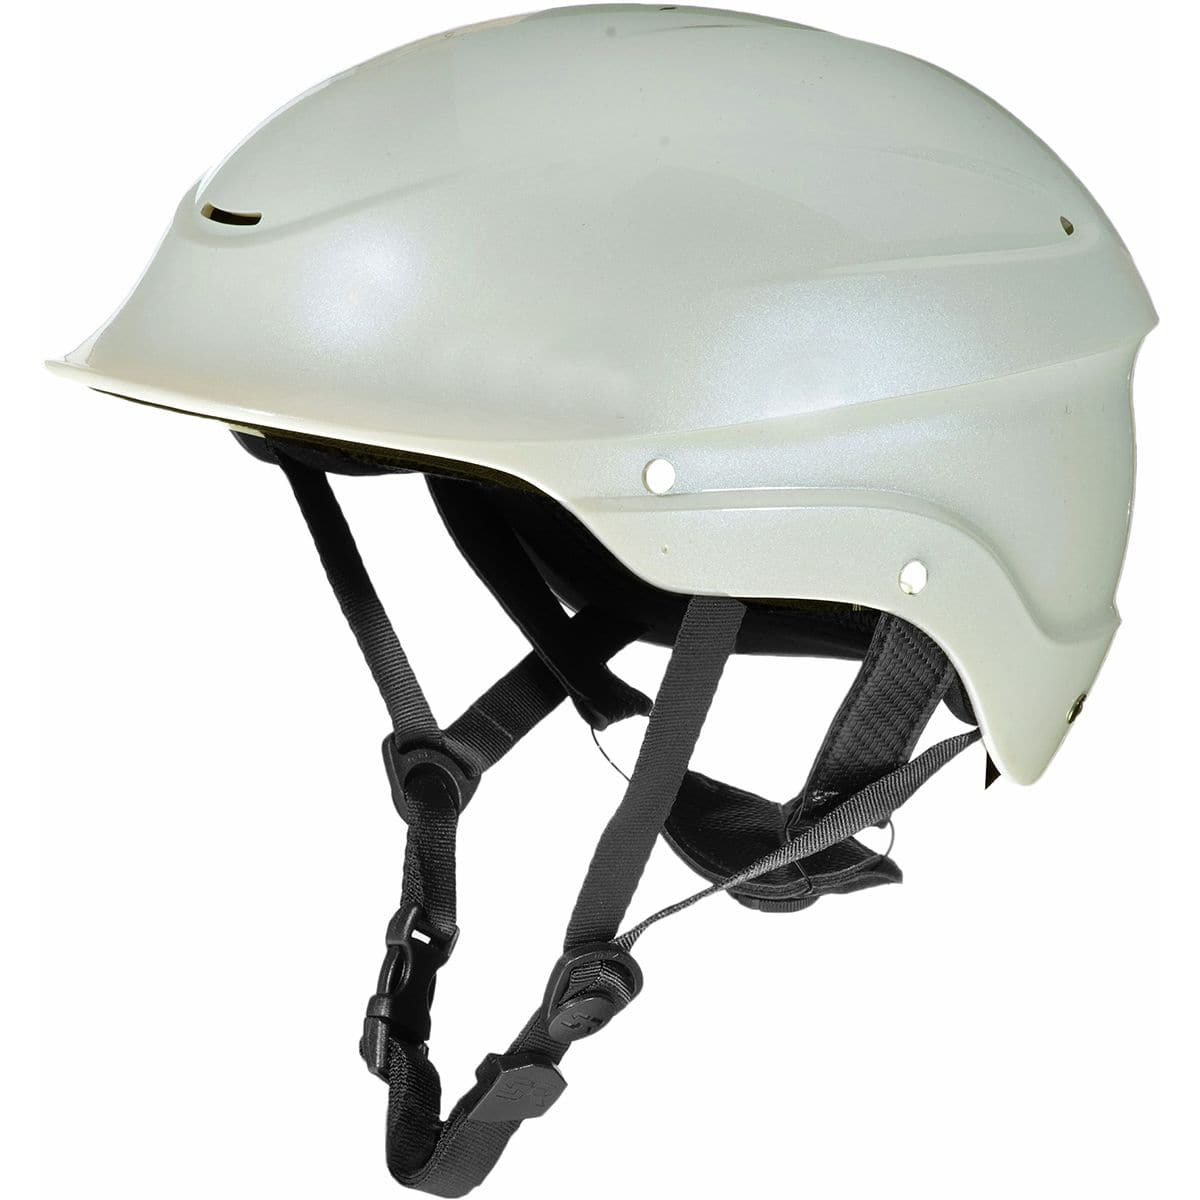 Featuring the Standard Halfcut Helmet helmet manufactured by Shred Ready shown here from a third angle.